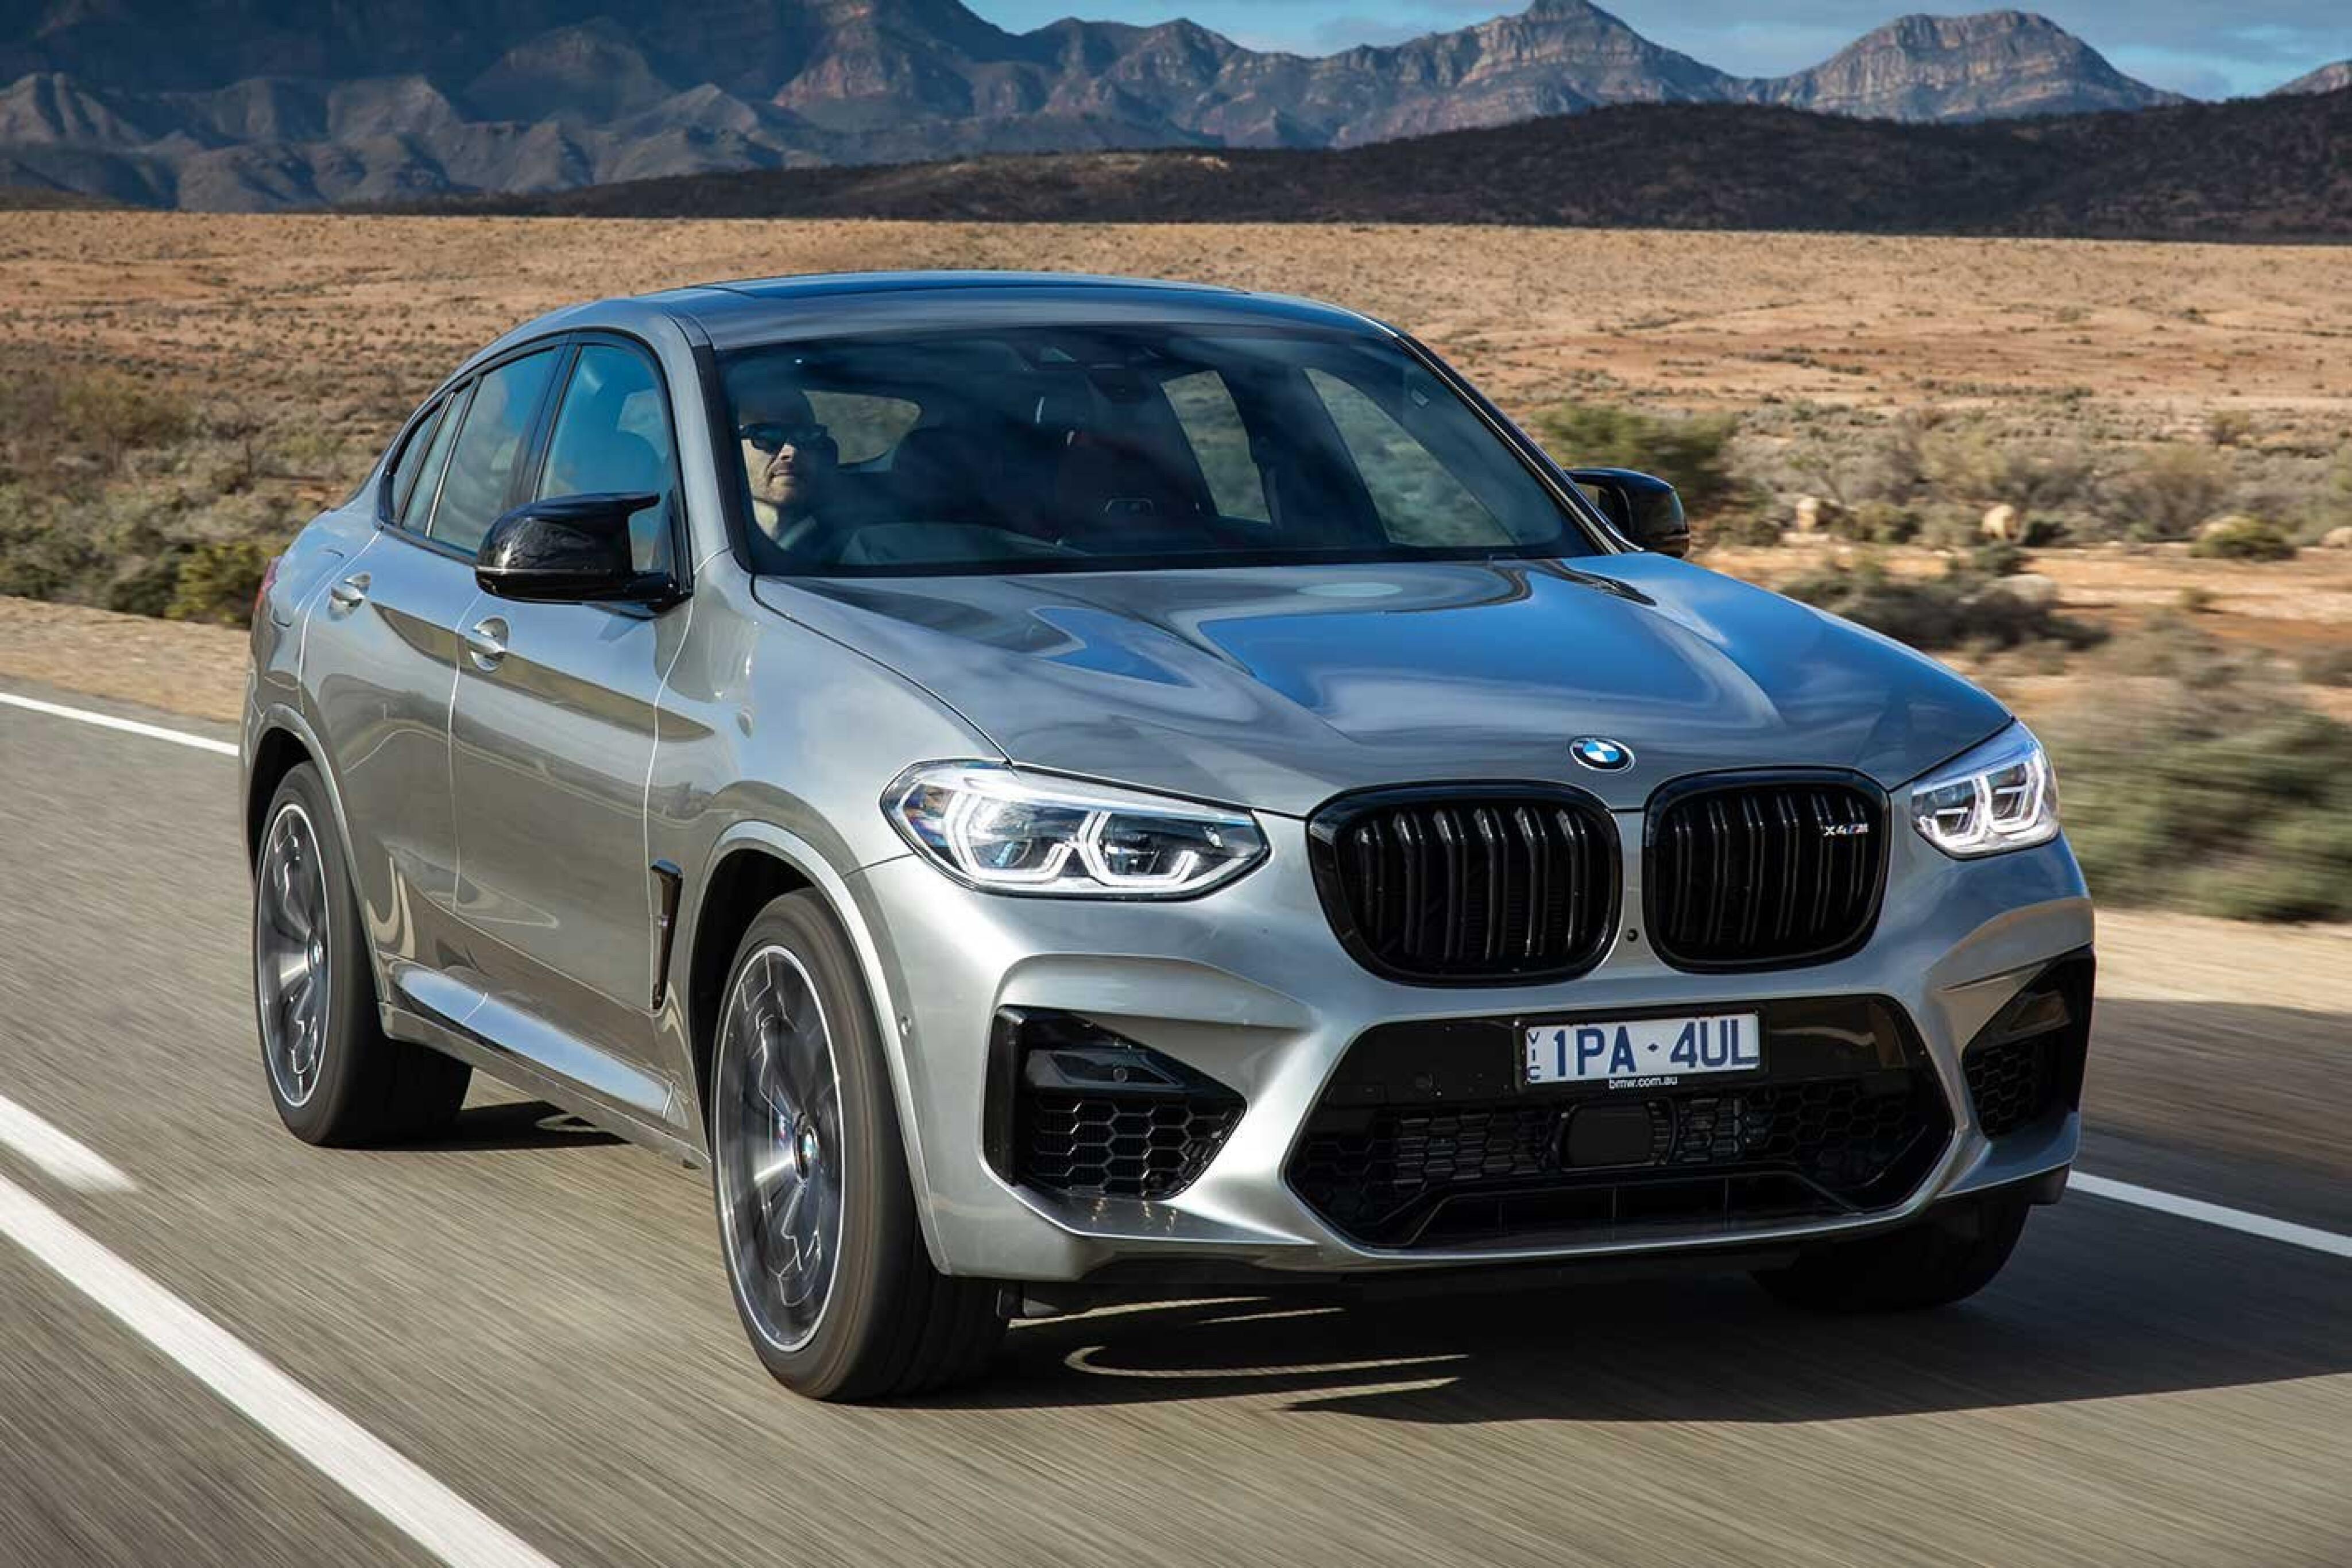 b70c09be/2019 bmw x4 m competition performance review jpg